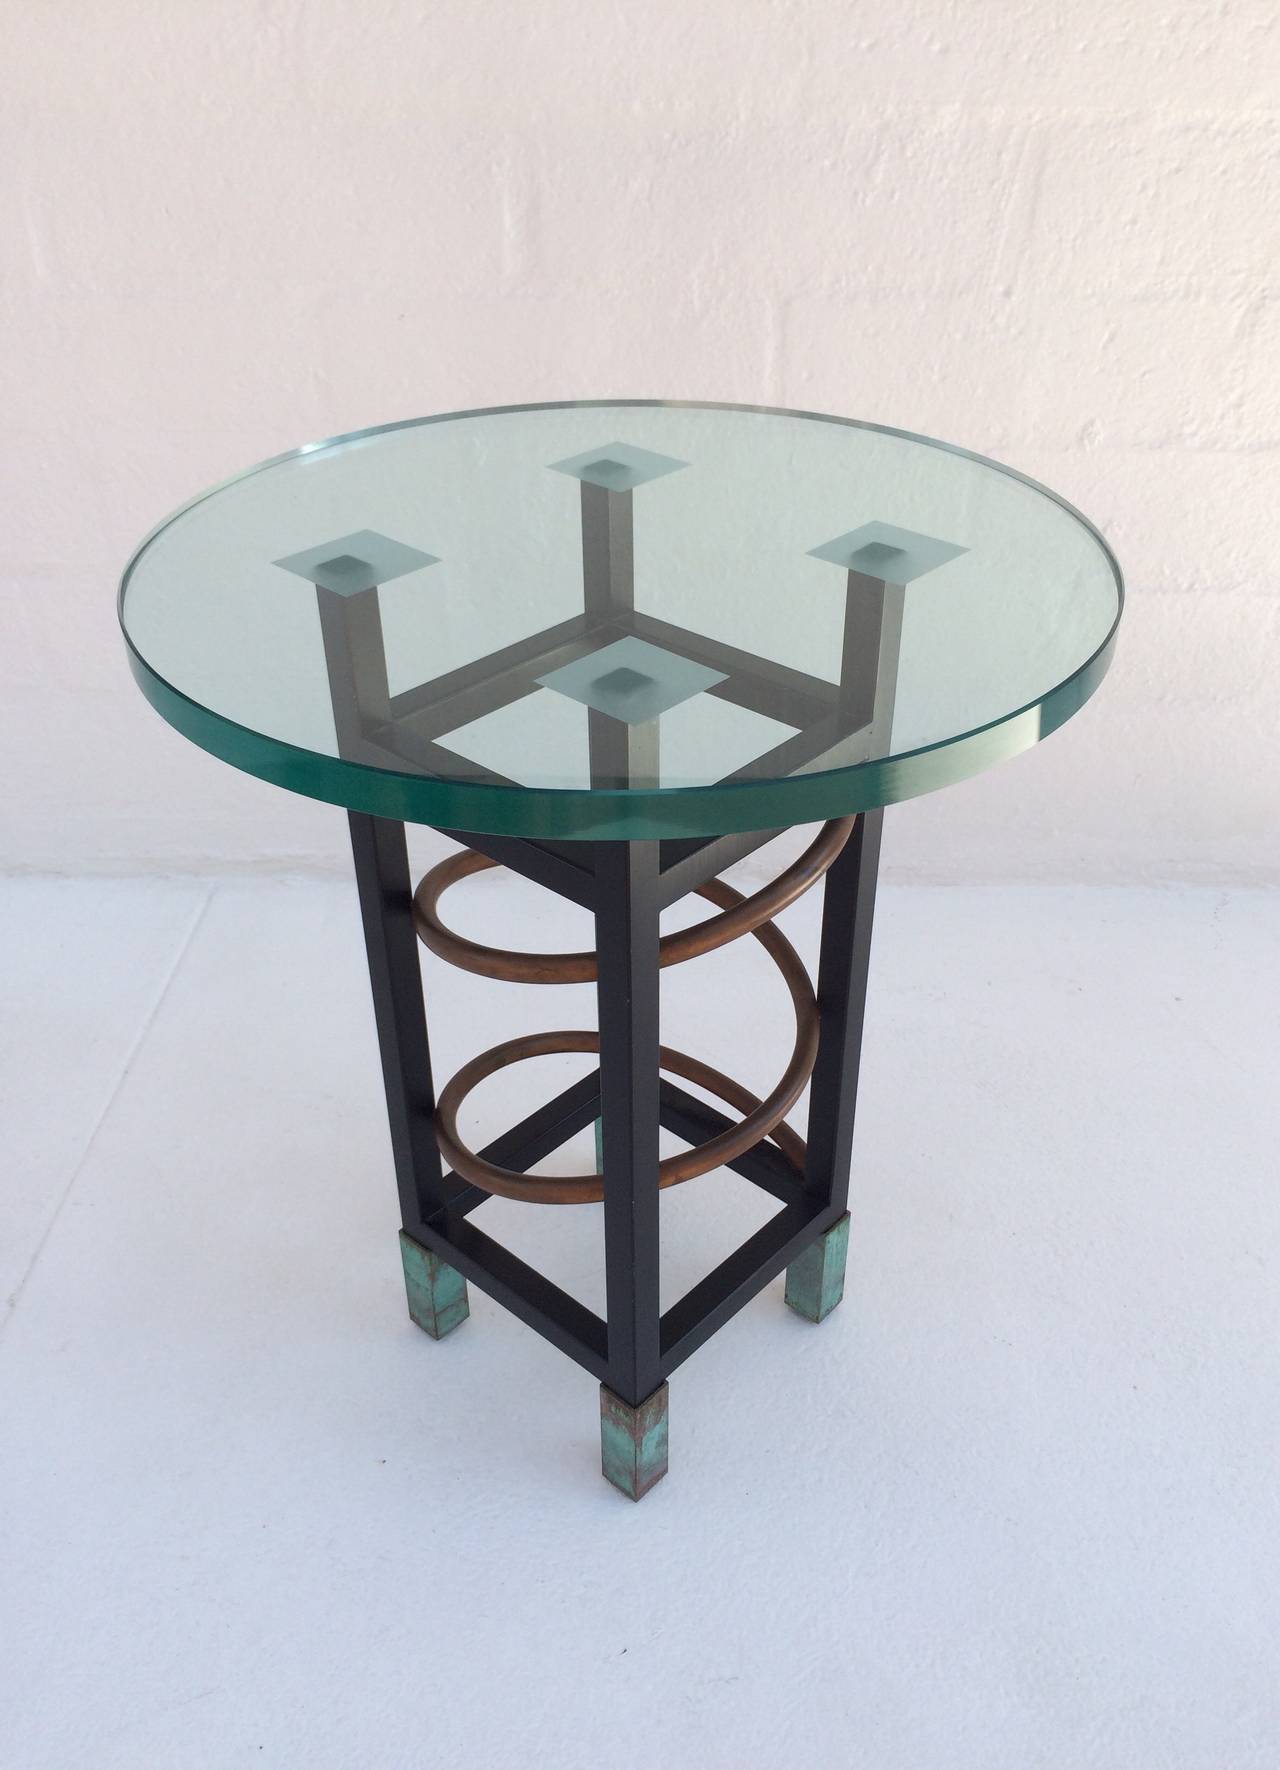 This 1980s Memphis style occasional table consist of painted steel with copper coil tubing and copper feet. 
The round glass top is 3/4 inch thick.